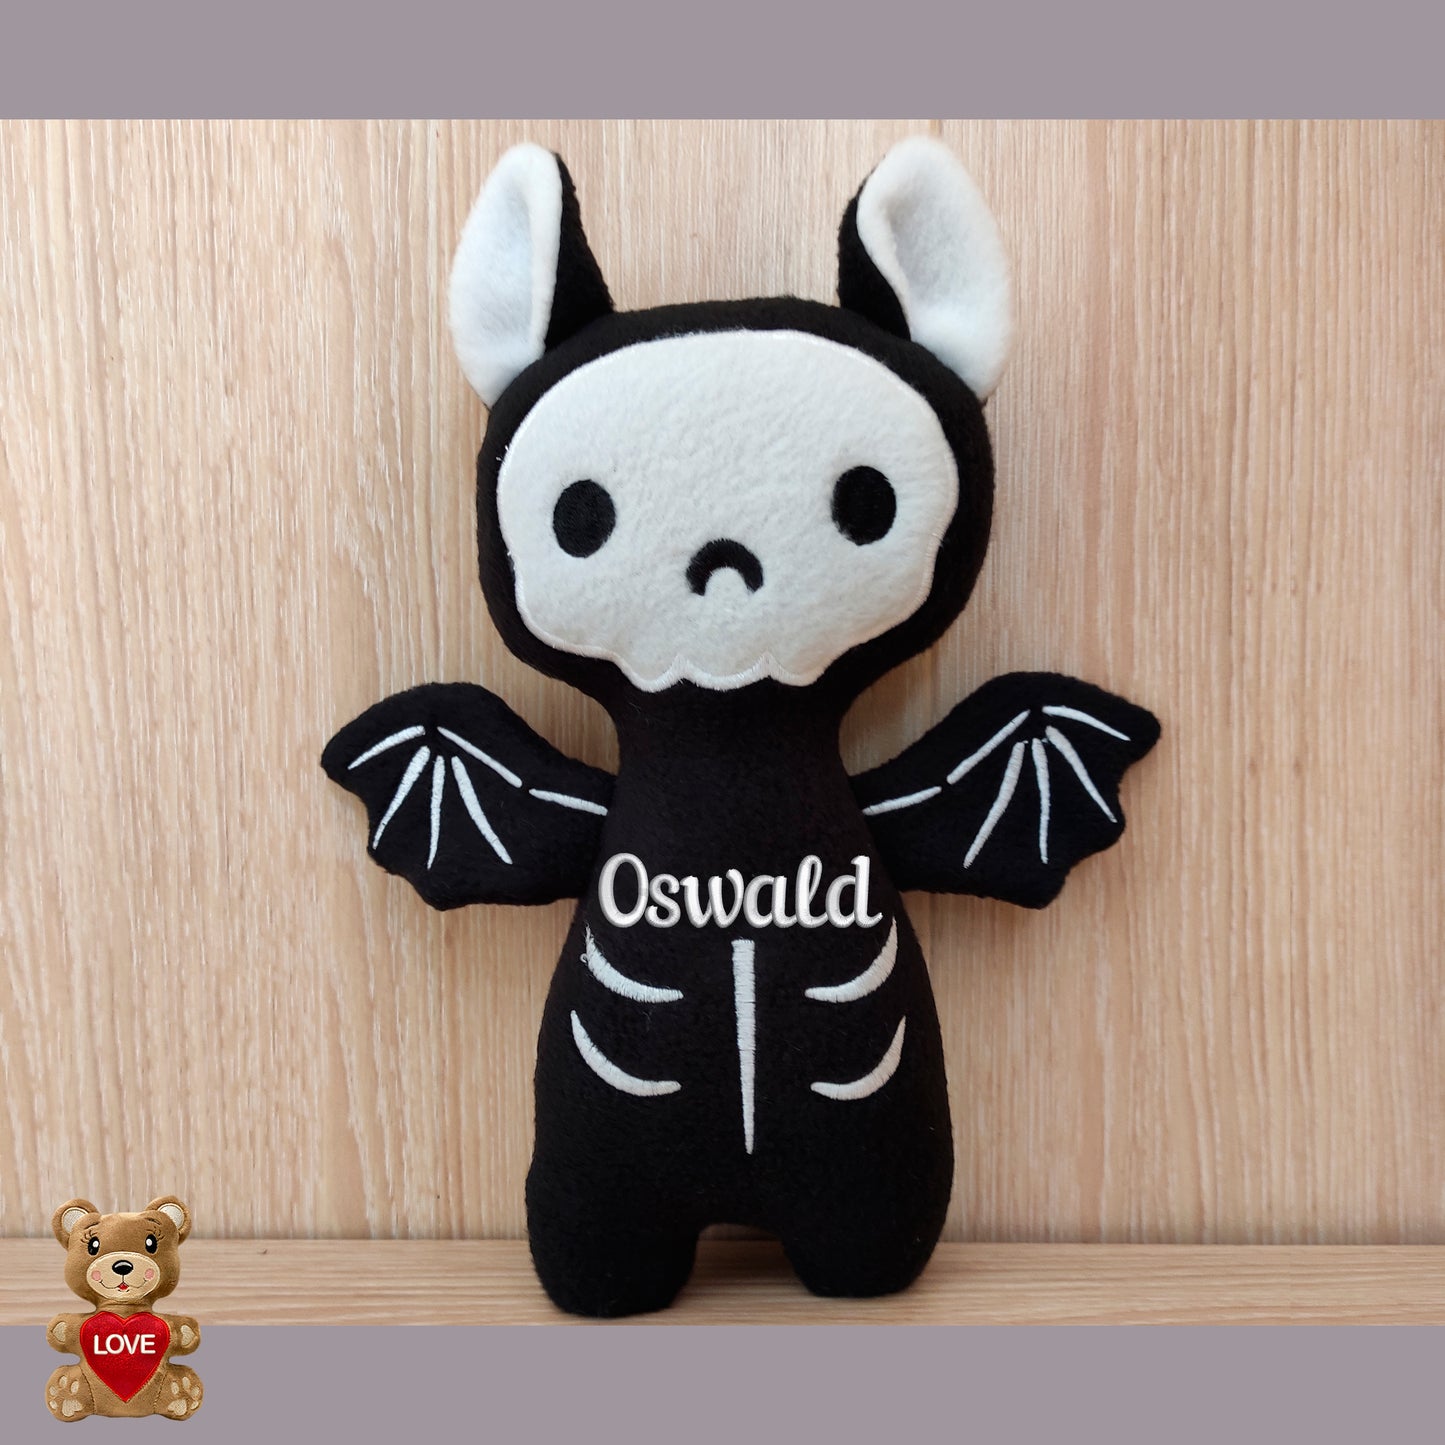 Personalised embroidery Plush Soft Toy Haloween Bat ,Super cute personalised soft plush toy, Personalised Gift, Unique Personalized Birthday Gifts , Custom Gifts For Children